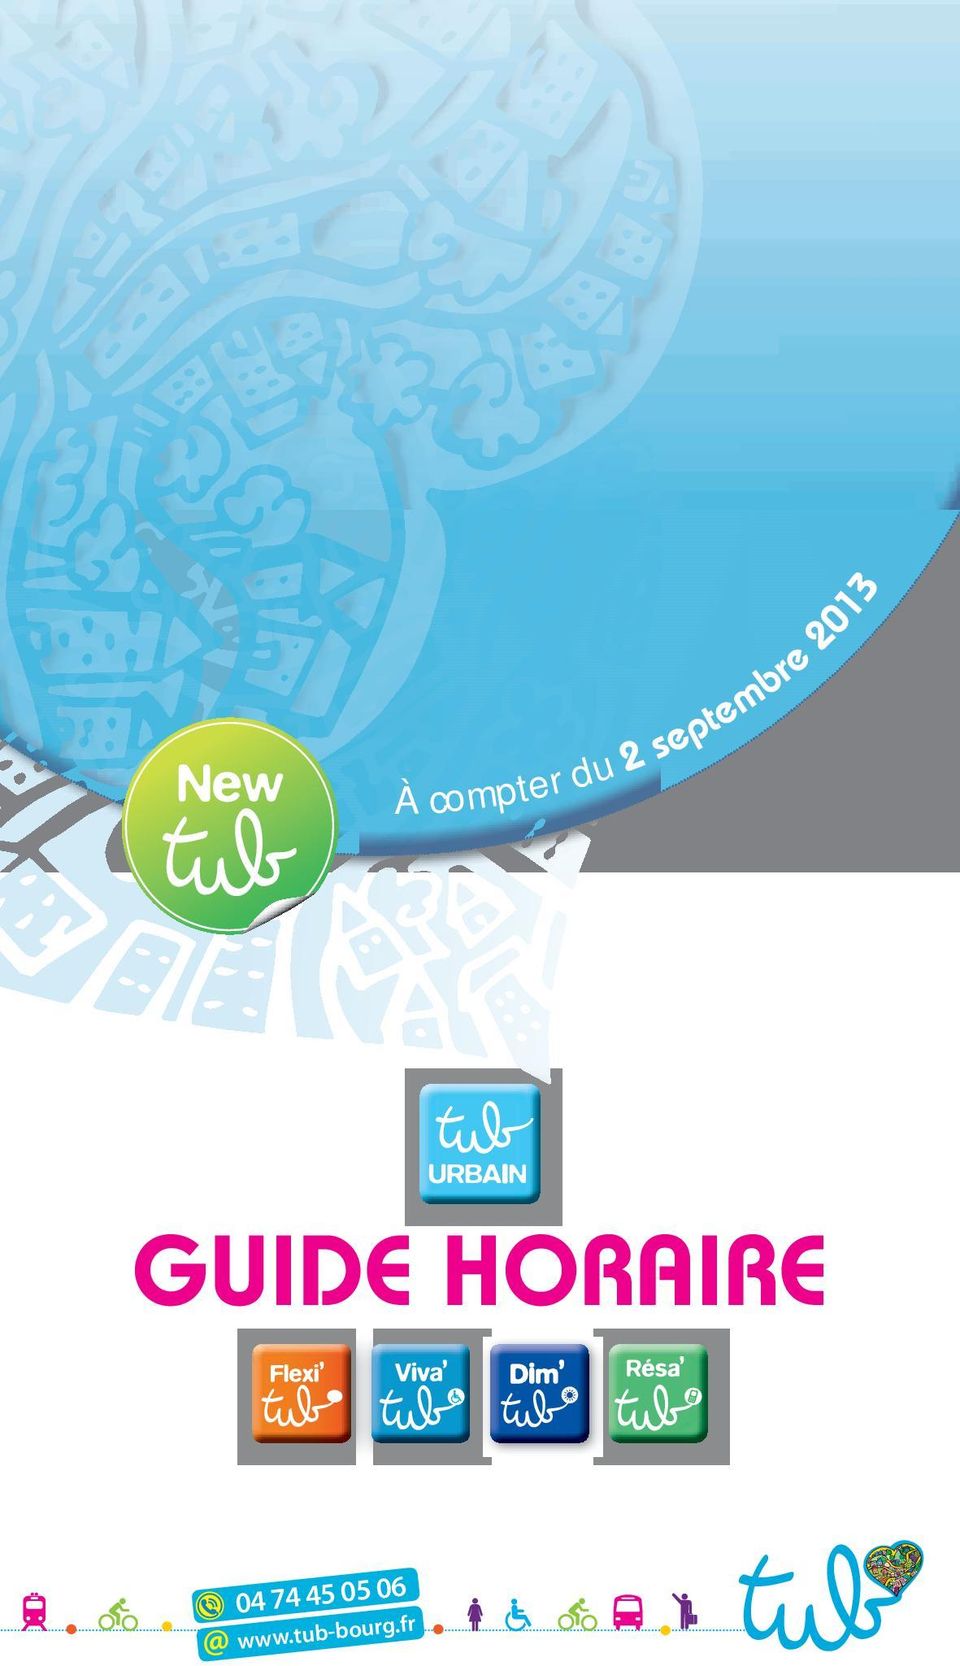 GUIDE HORAIRE 04 74